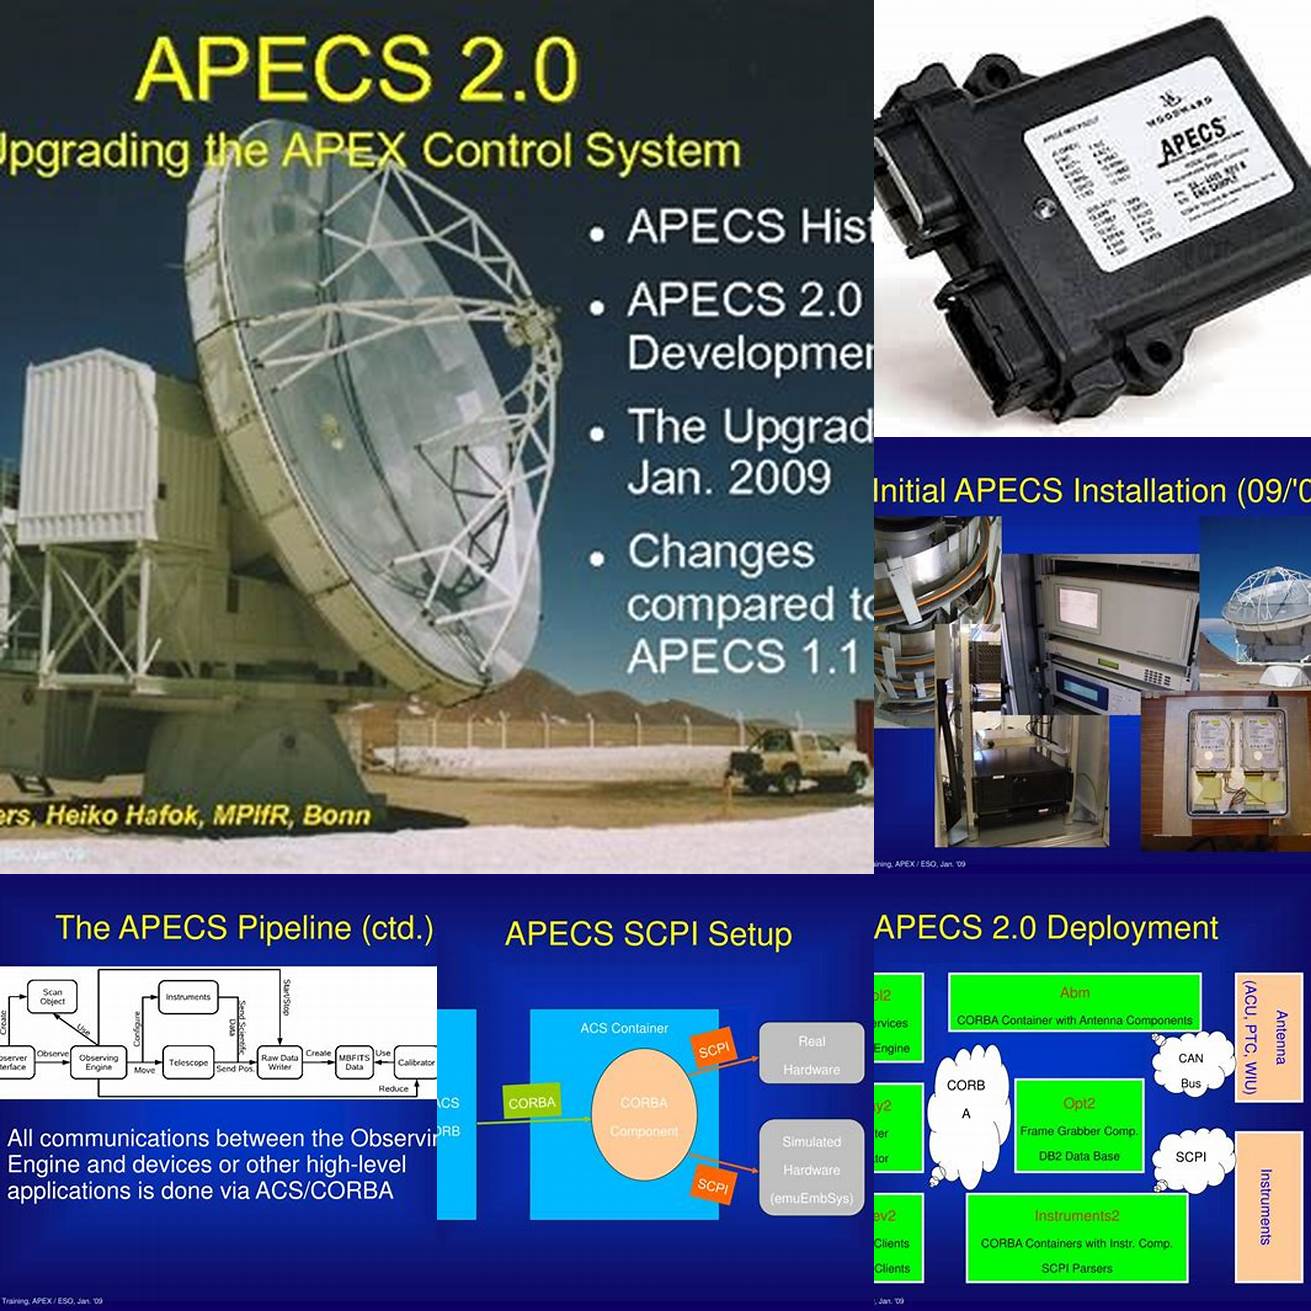 Advanced Productivity Electronic Control System APECS technology for improved response time and control